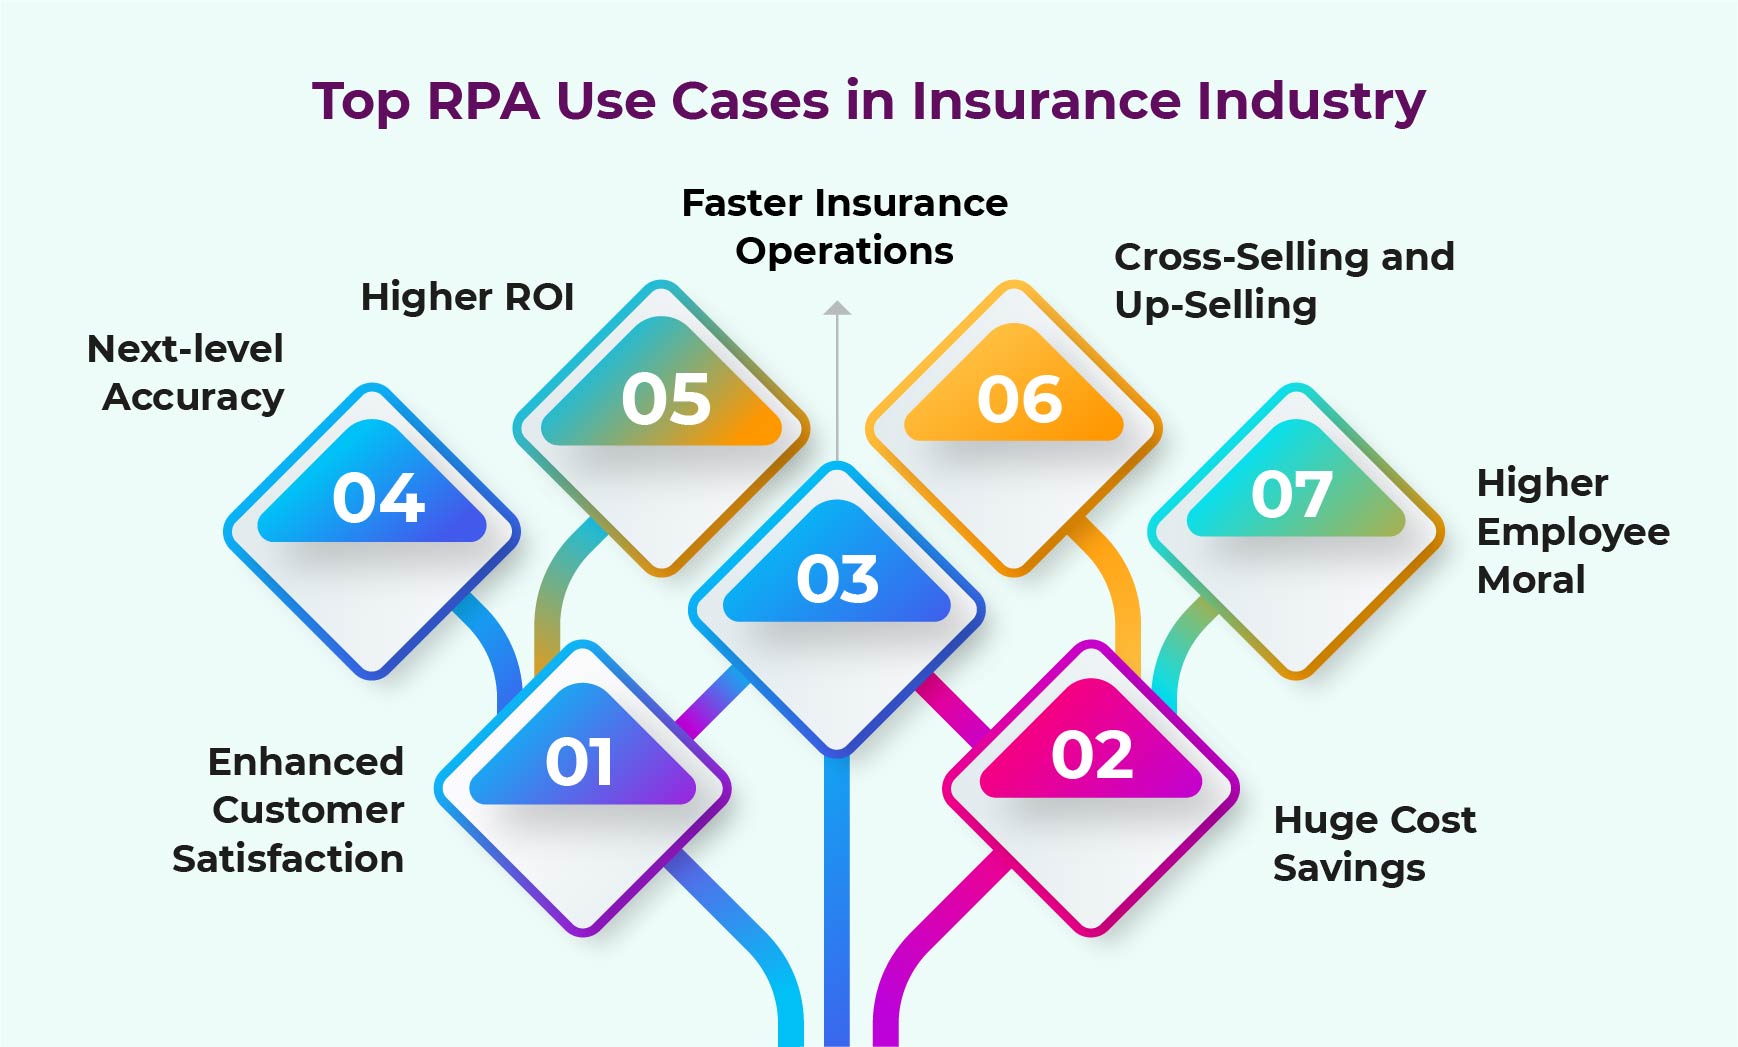 The Benefits of RPA in Insurance